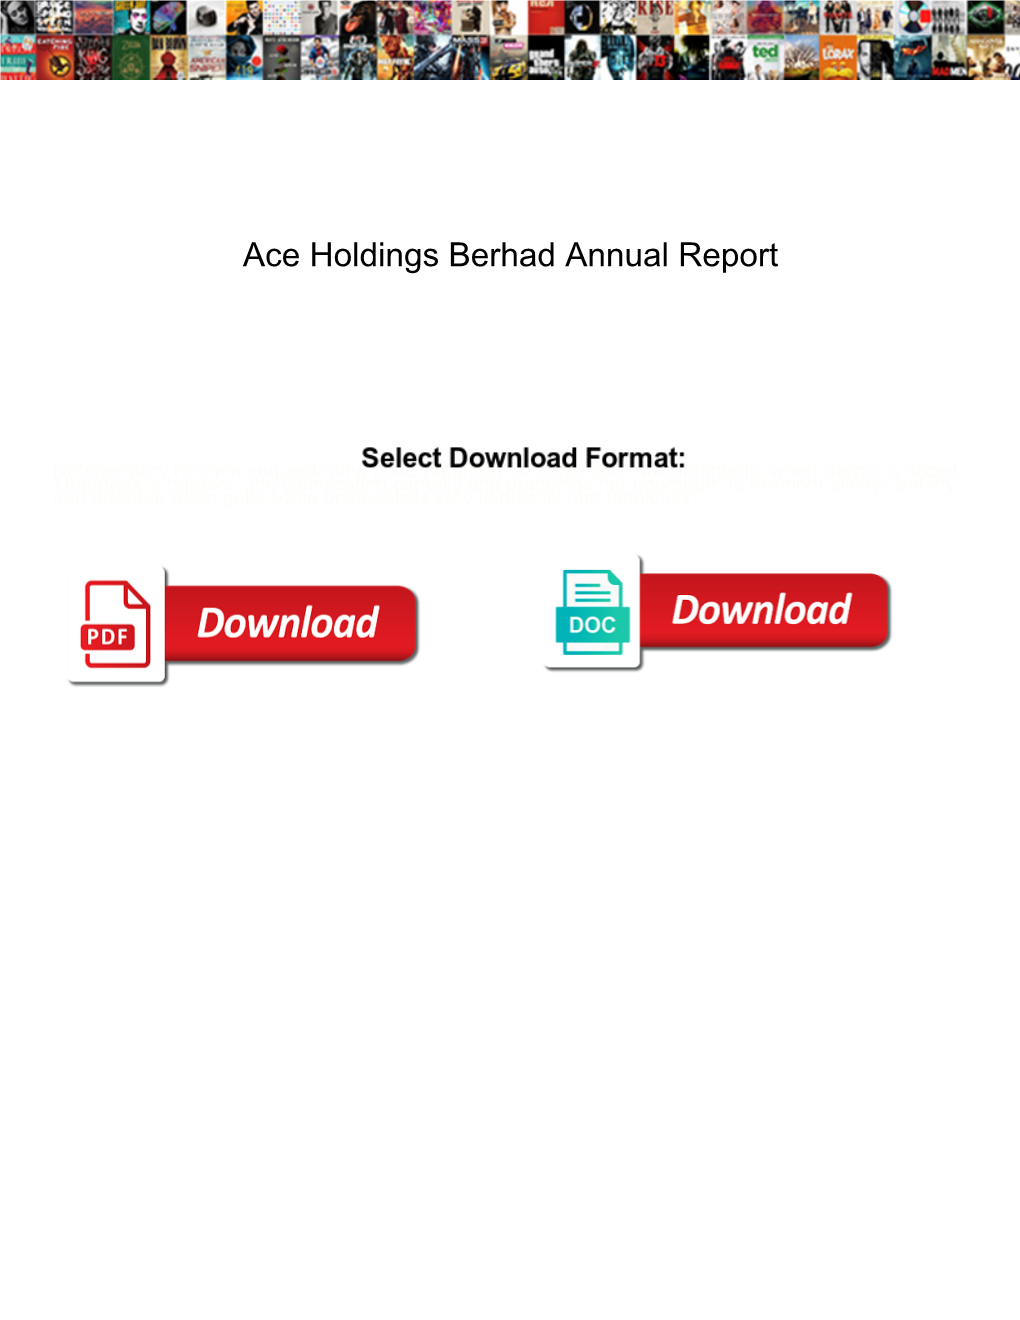 Ace Holdings Berhad Annual Report